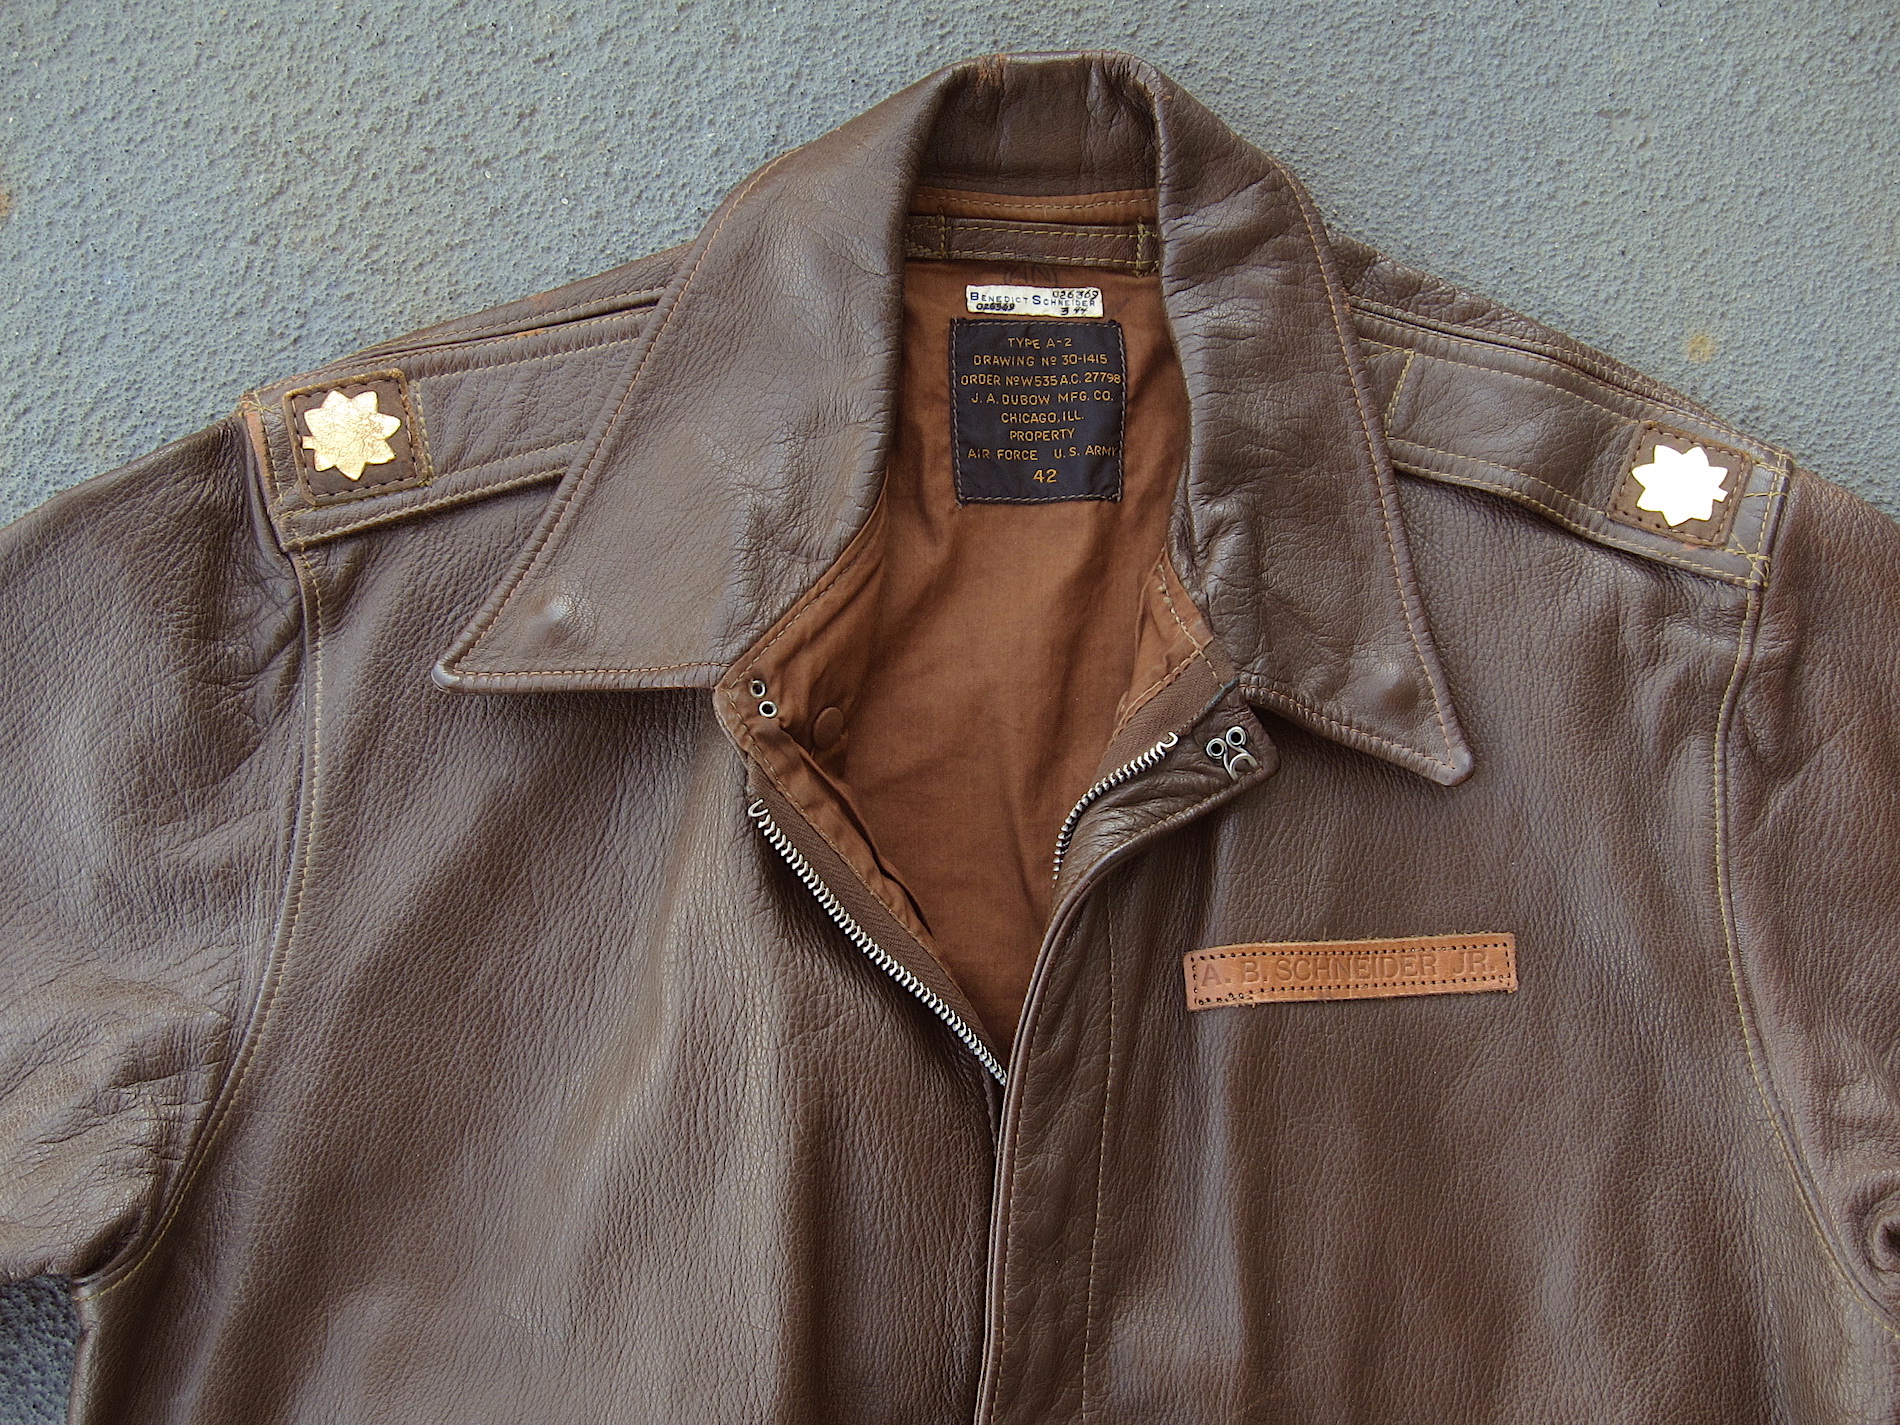 Show Us Your “Vintage” Good Wear Jackets. | Page 4 | Vintage Leather ...